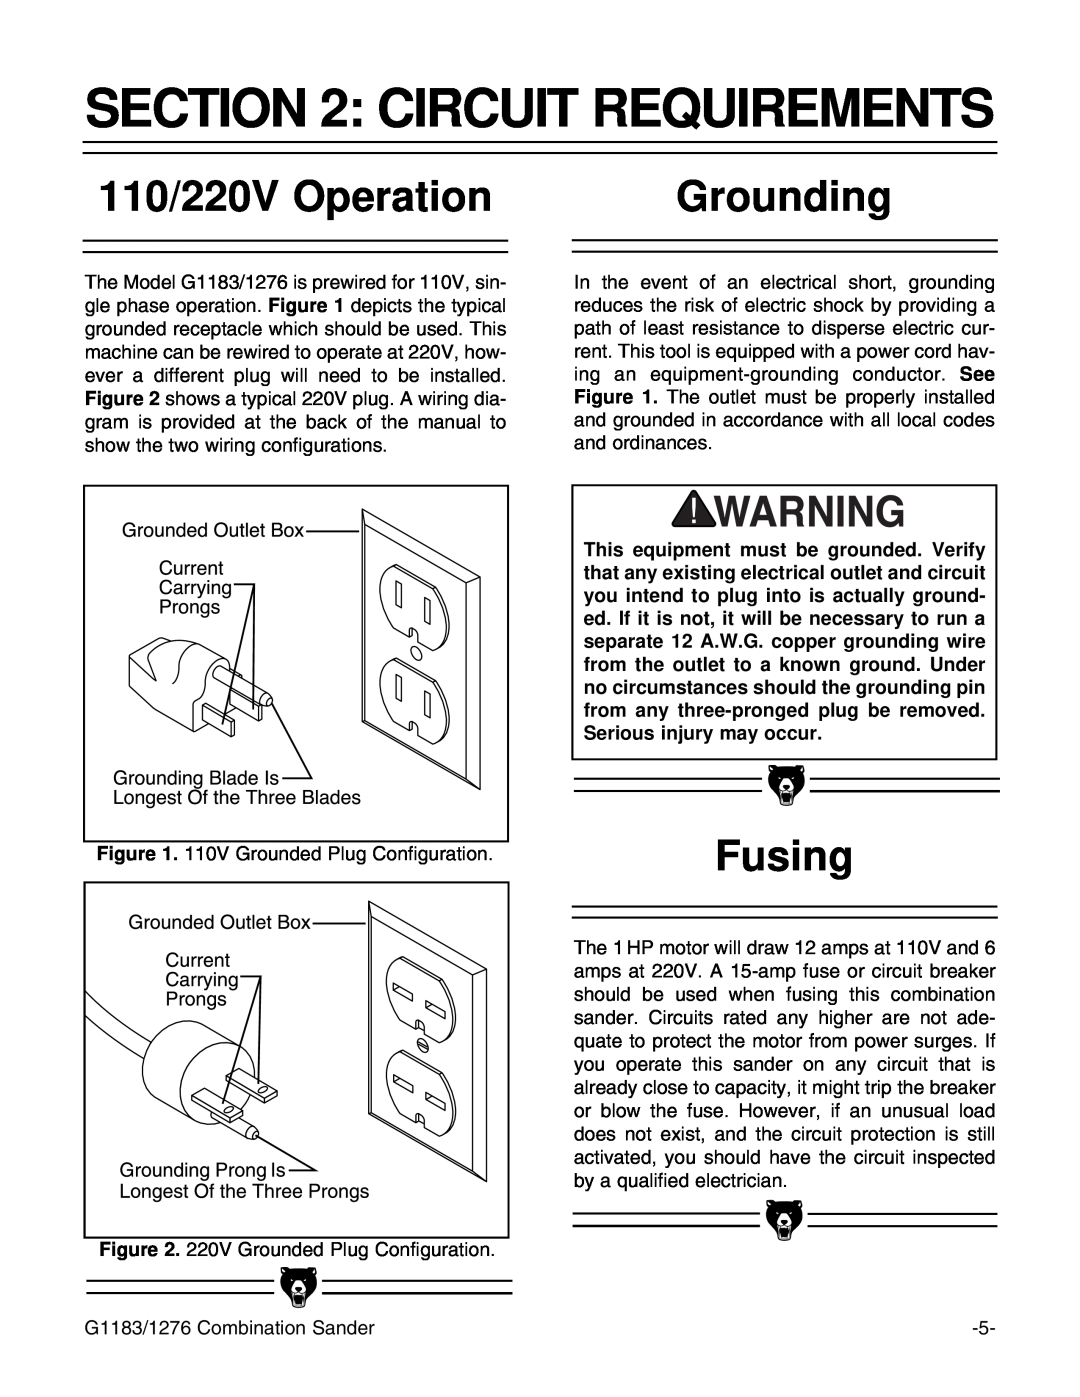 Grizzly G1276, G1183 instruction manual Circuit Requirements, 110/220V Operation, Grounding, Fusing 